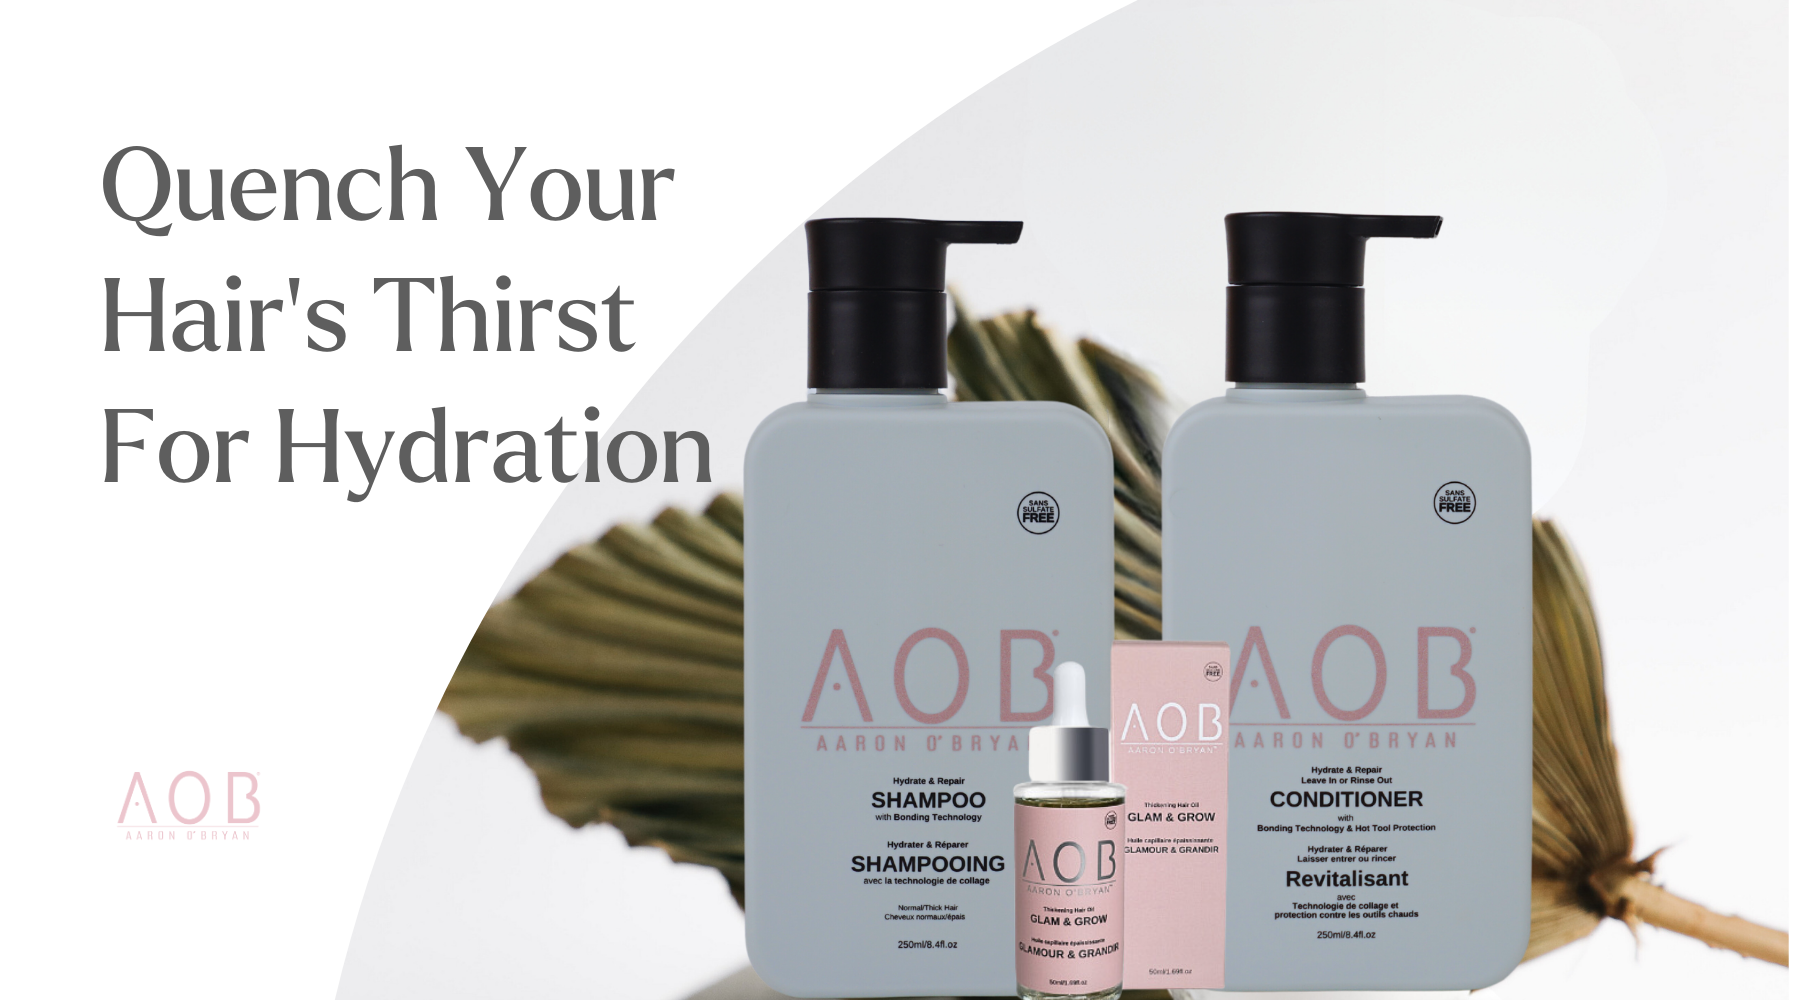 Quench Your Hair's Thirst For Hydration